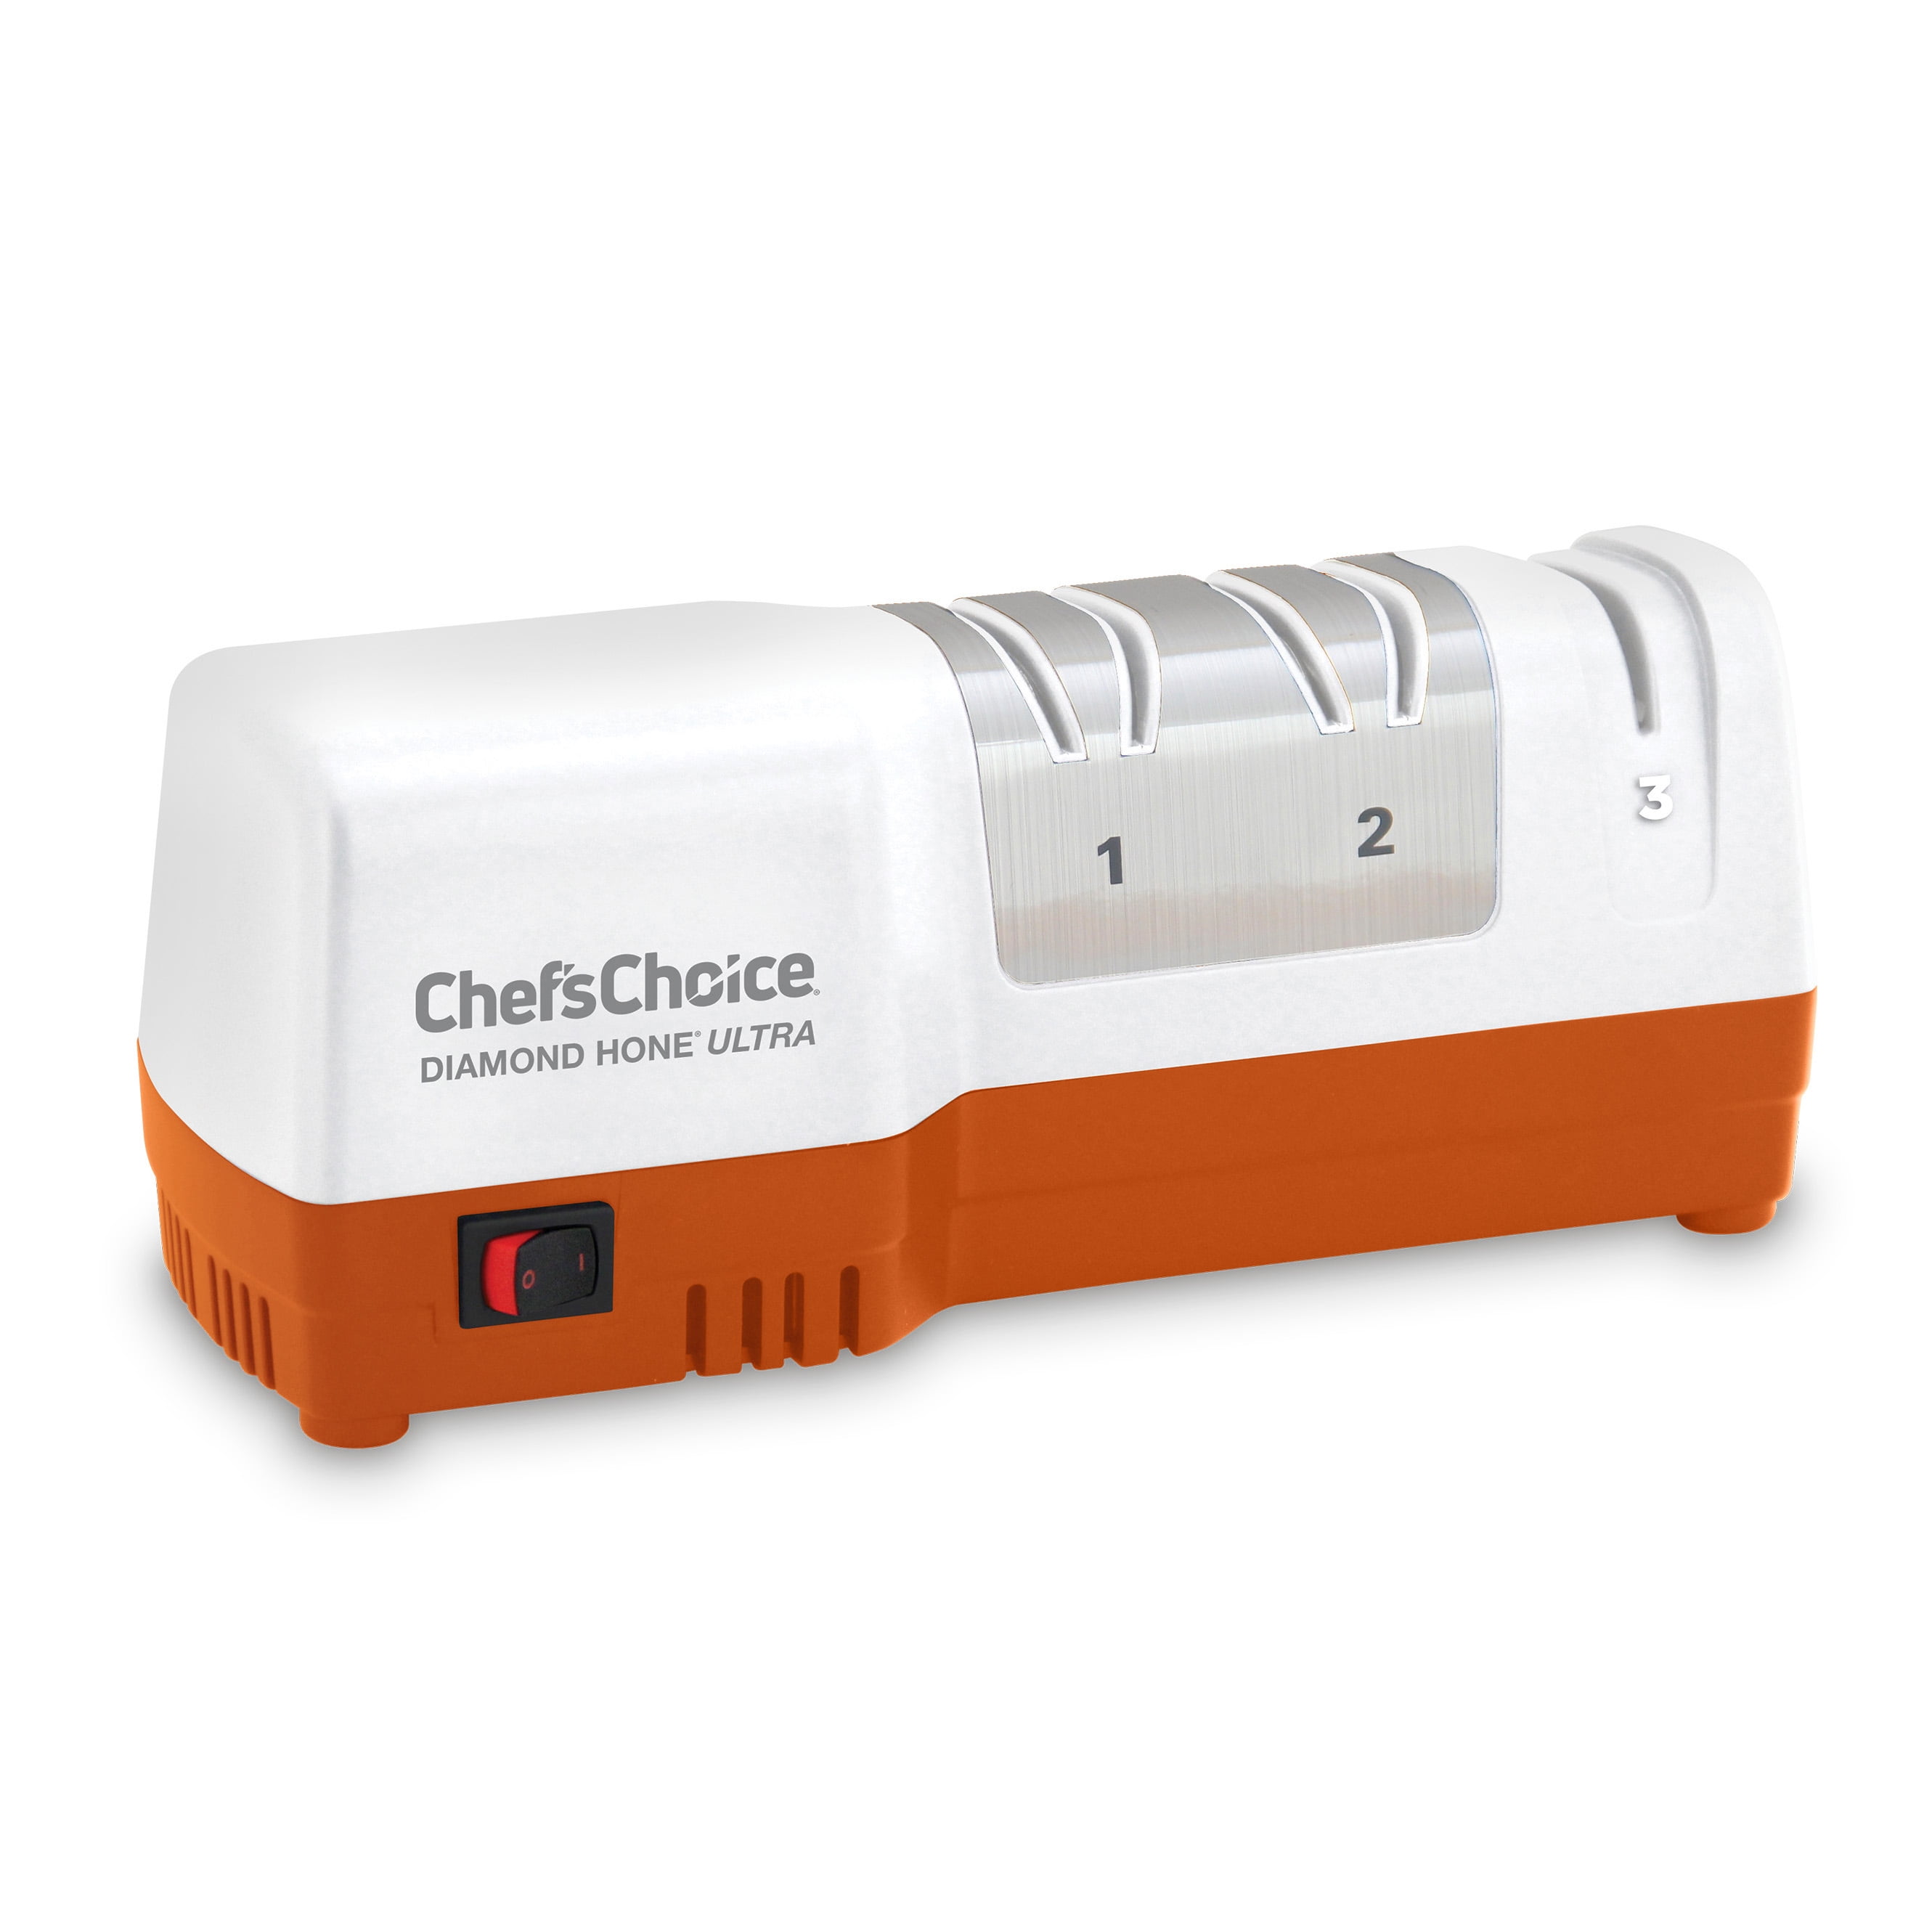 Chef's Choice DCB320 3-Stage 20 DC Powered Electric Sharpener with Battery  + Reviews